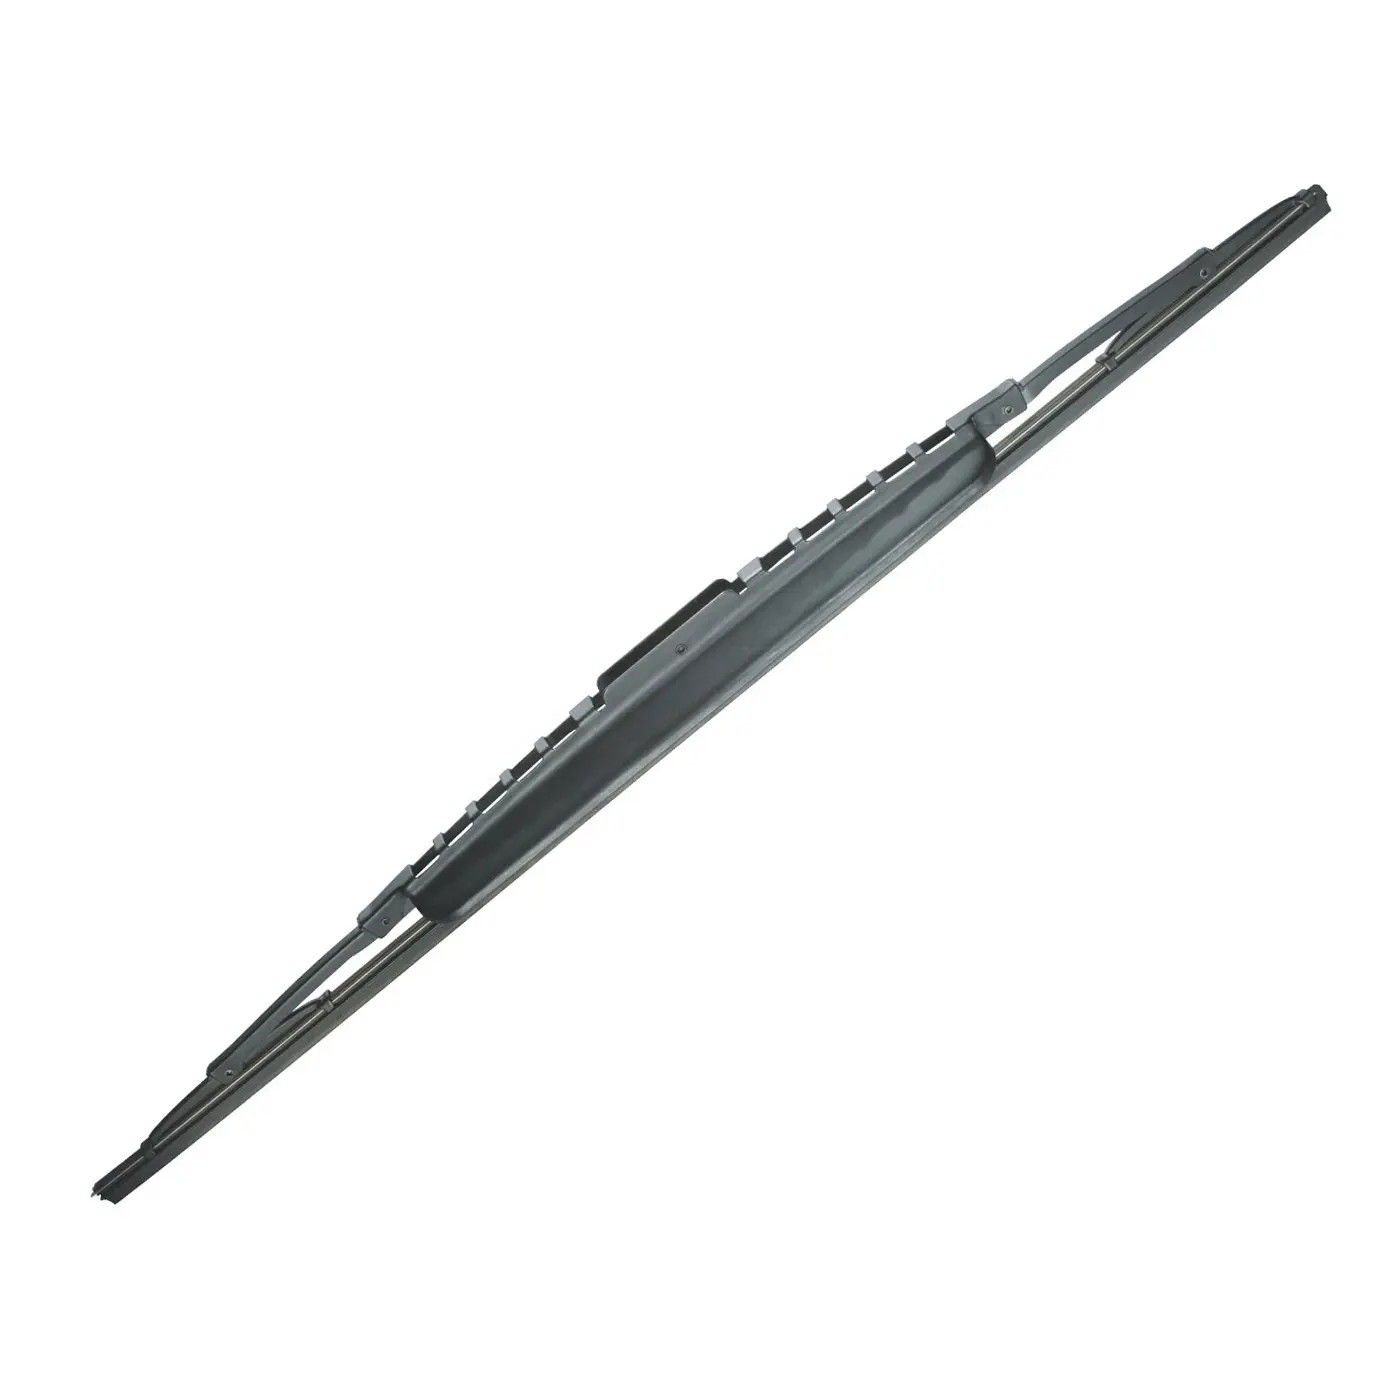 K-103 Conventional all mental Wiper Blade with a big mental spoiler for all cars same design as SWF 16"/400mm to 24"/600mm